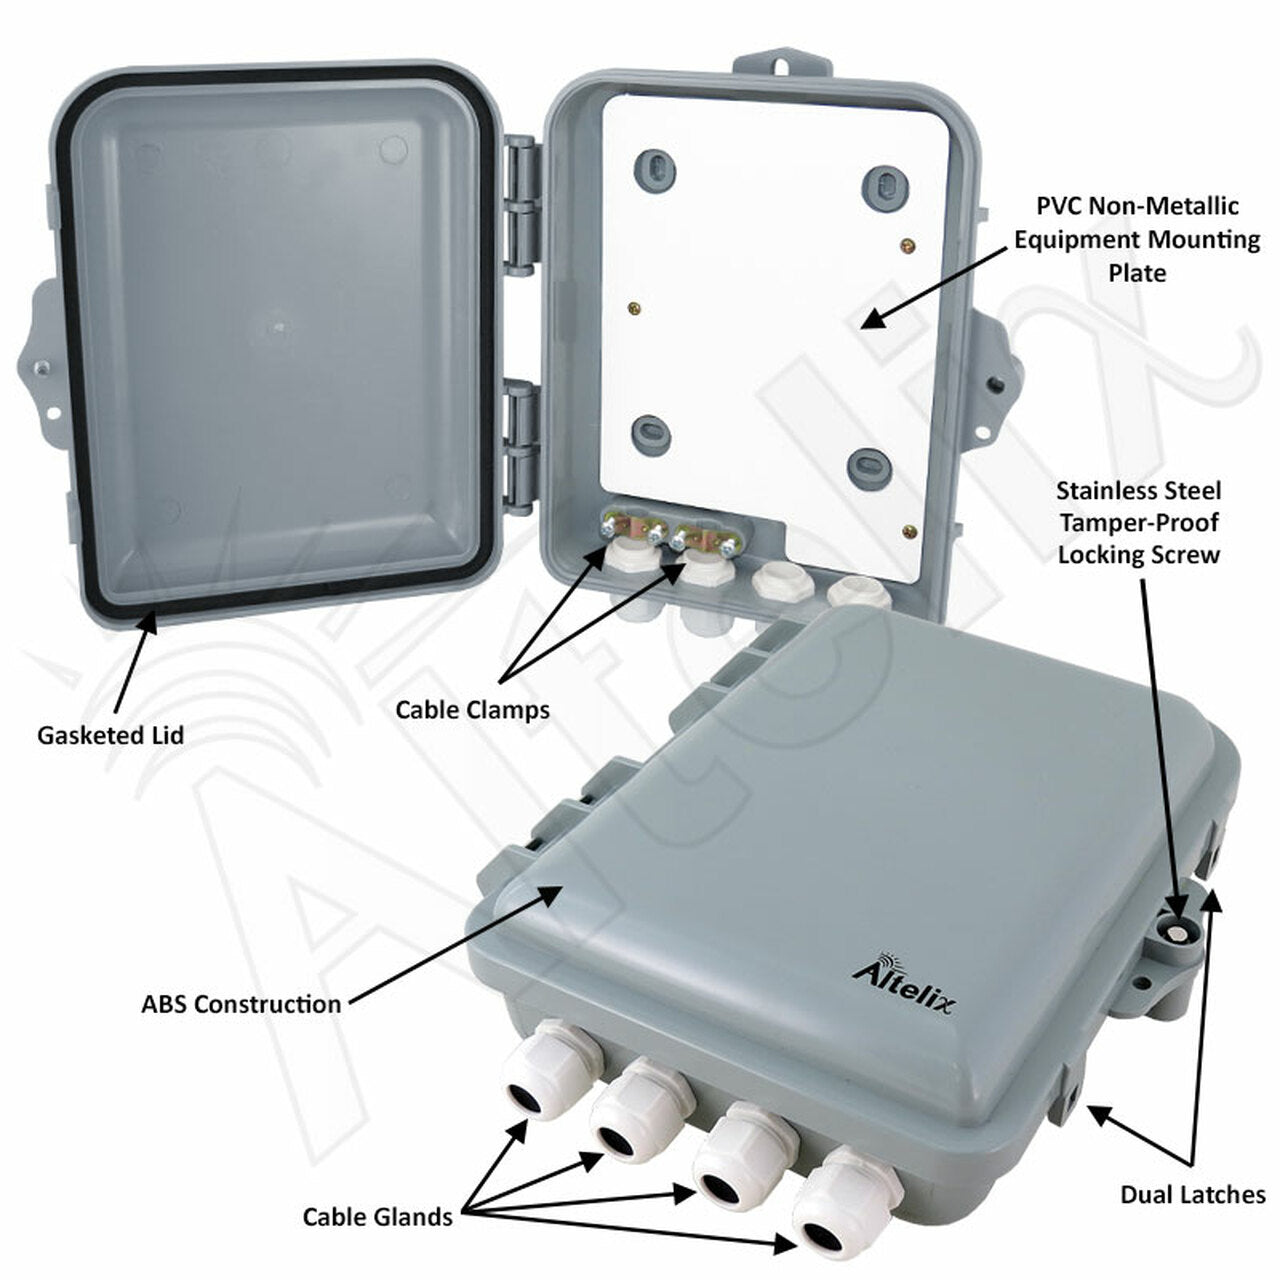 Altelix 9x8x3 IP66 NEMA 4X PC+ABS Indoor / Outdoor RF Transparent WiFi Access Point Enclosure with PVC Non-Metallic Equipment Mounting Plate-2